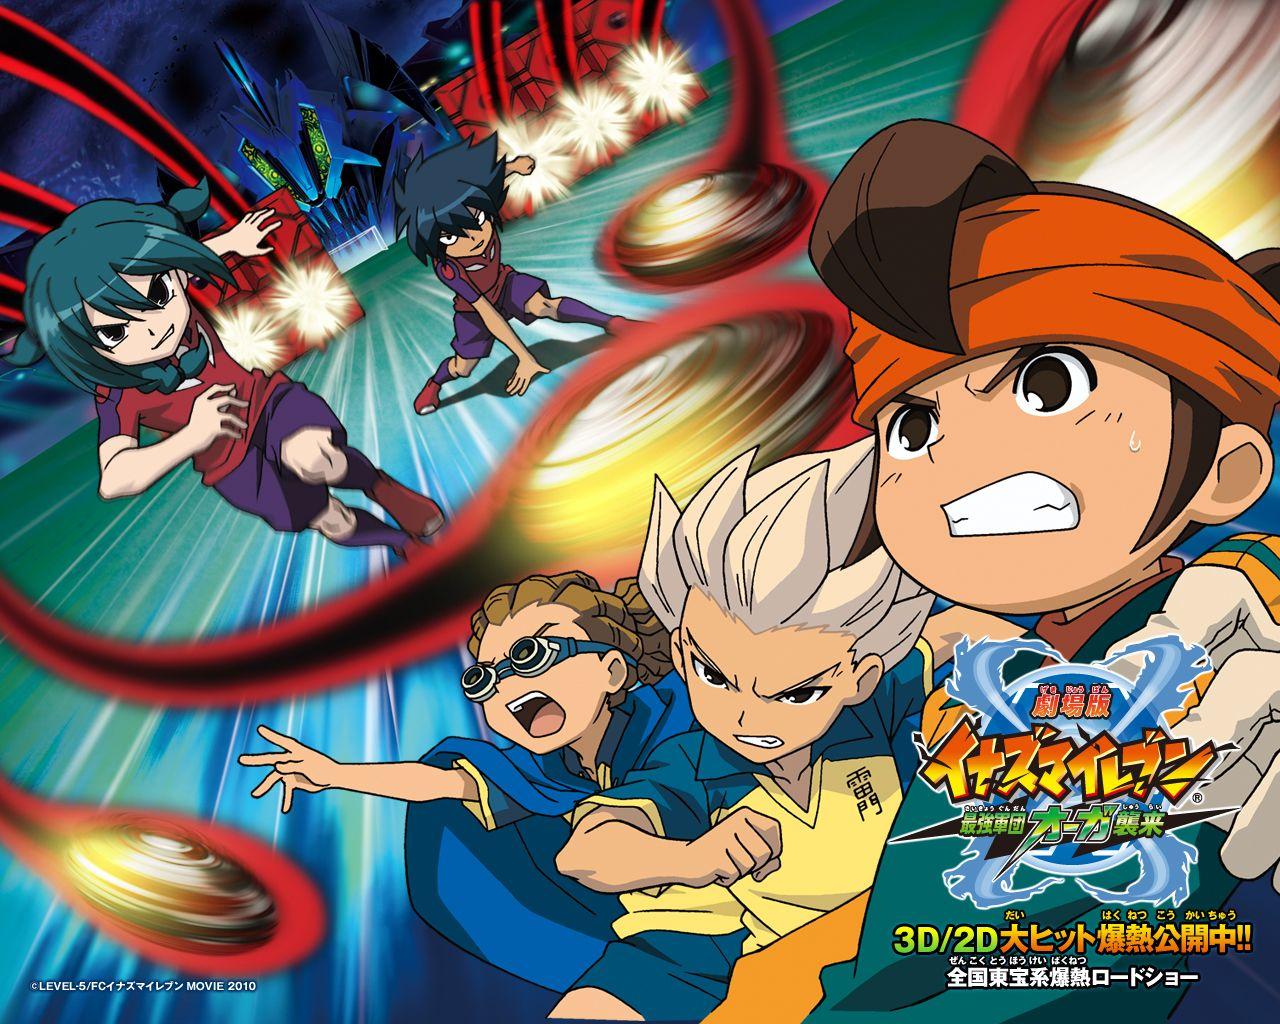 An awesome Inazuma Eleven Wallpaper!! >